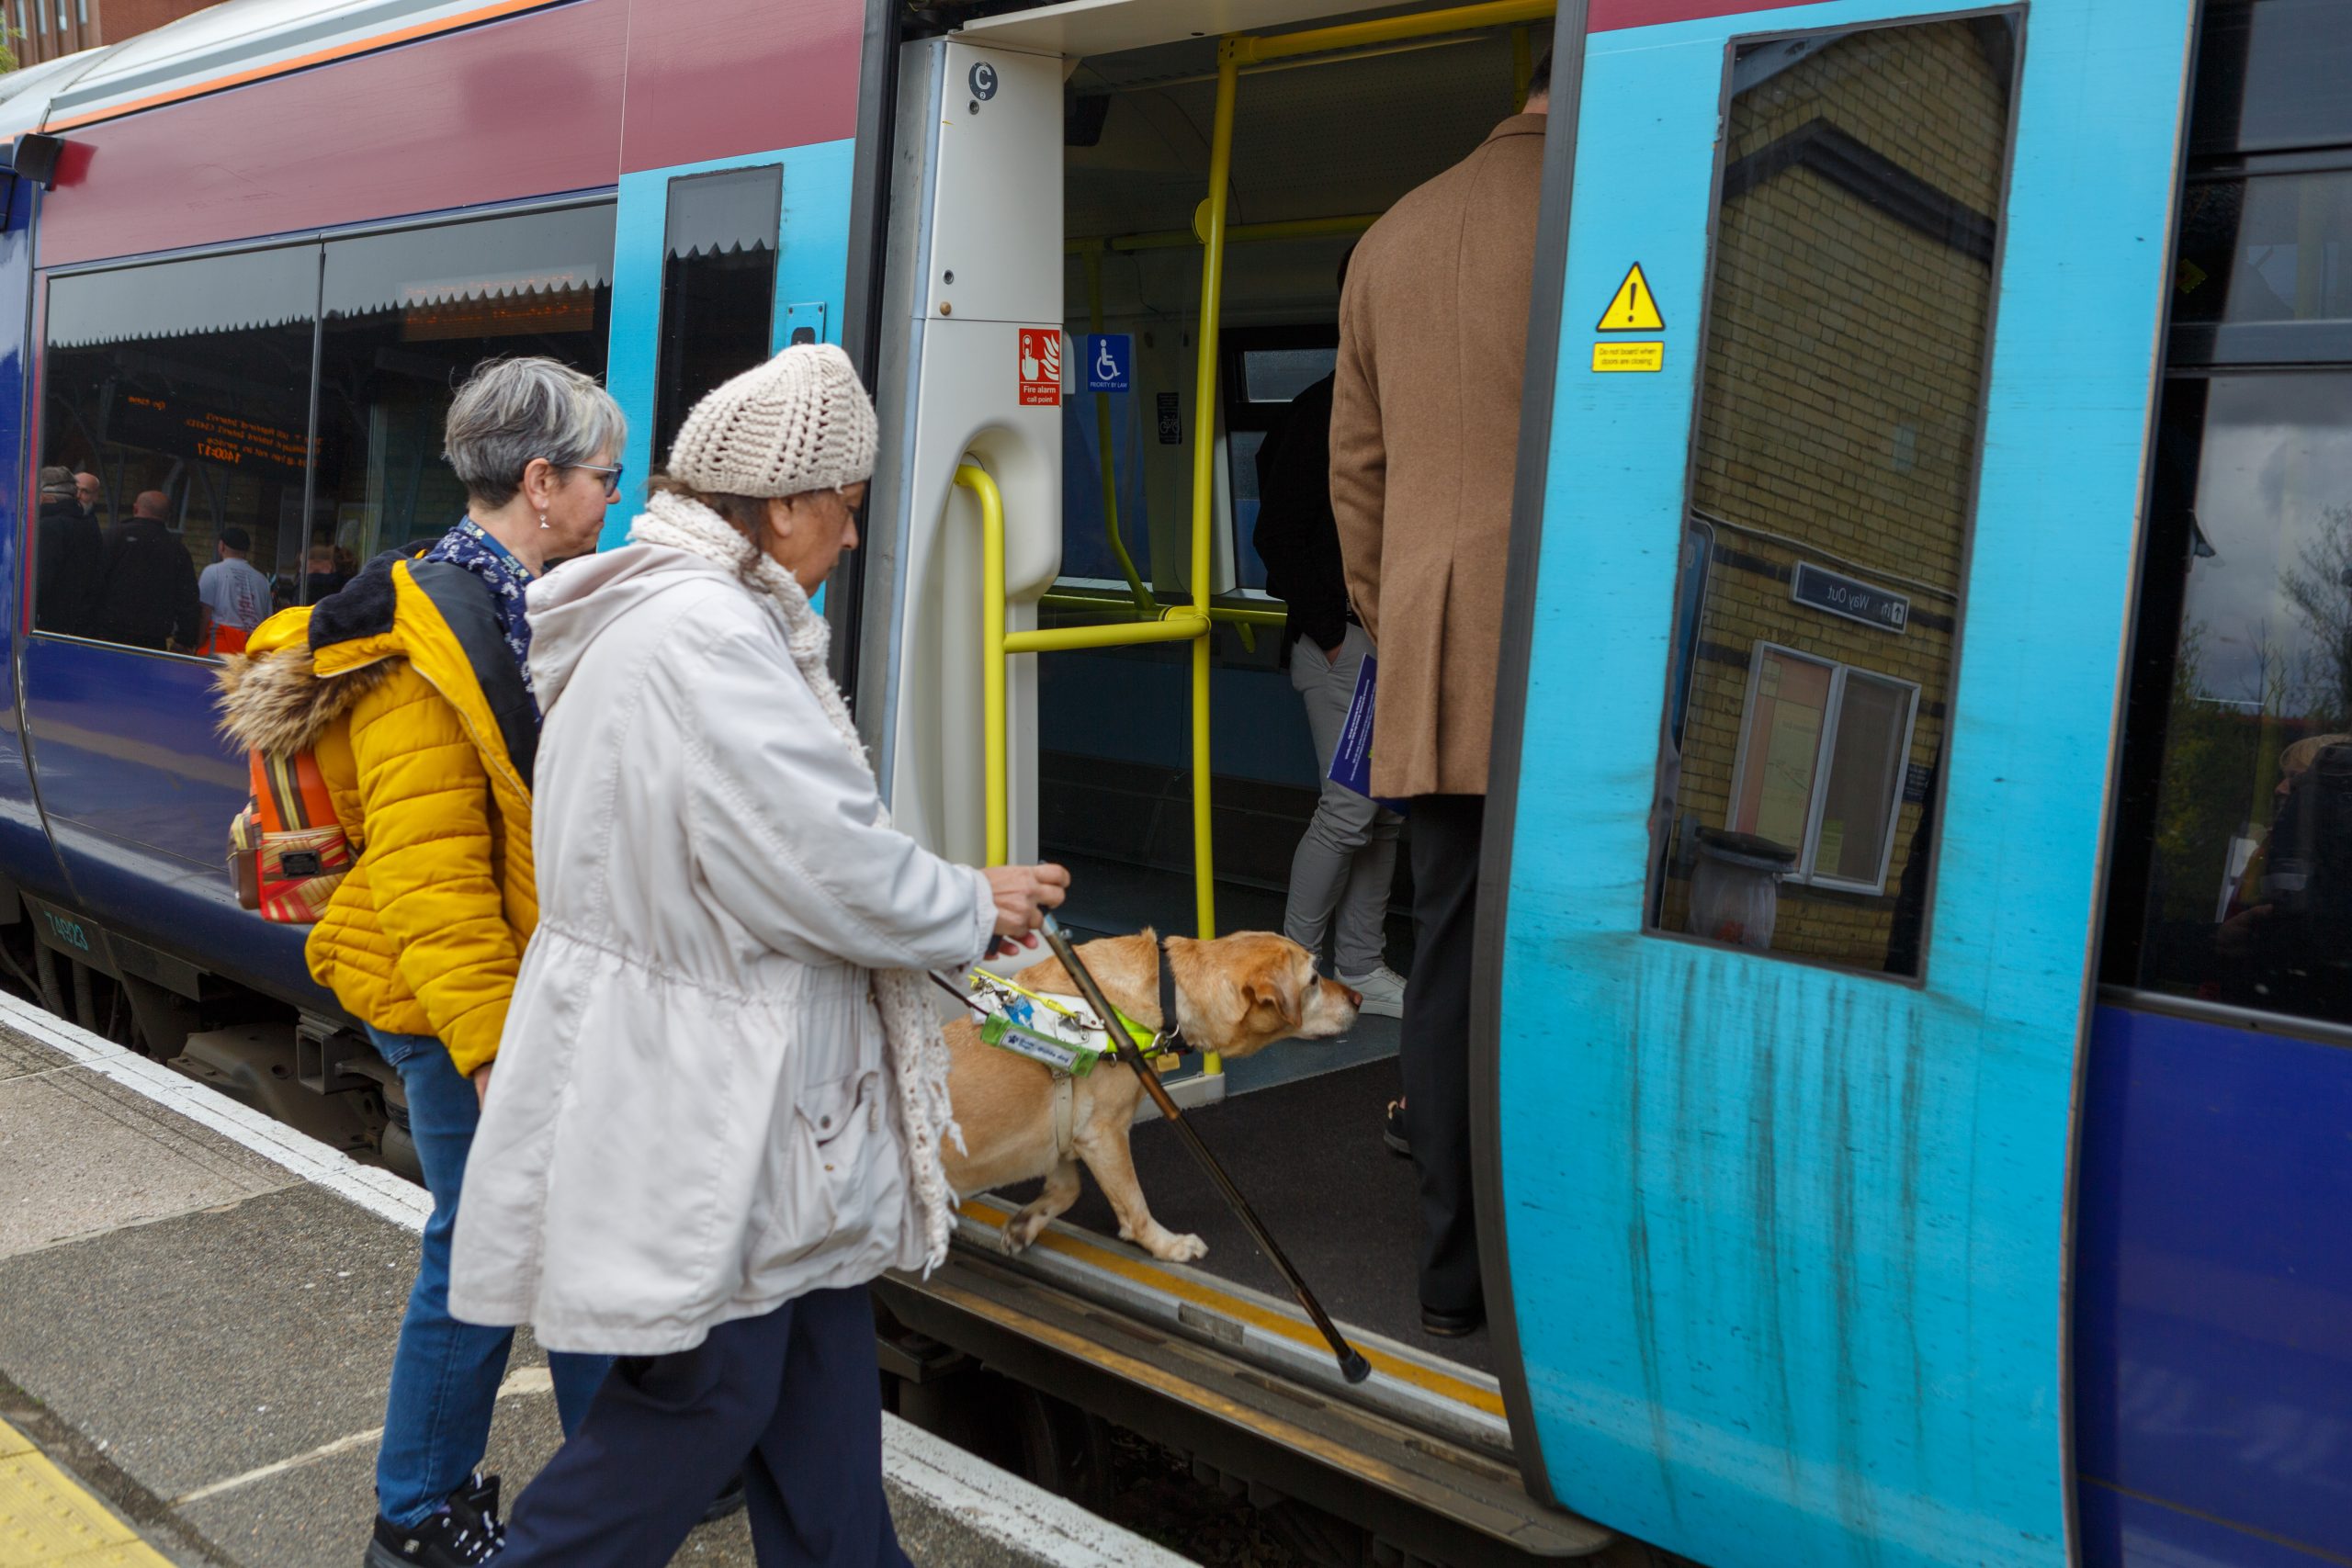 A guide dog leads there owner and an accompanying volunteer onto a train.